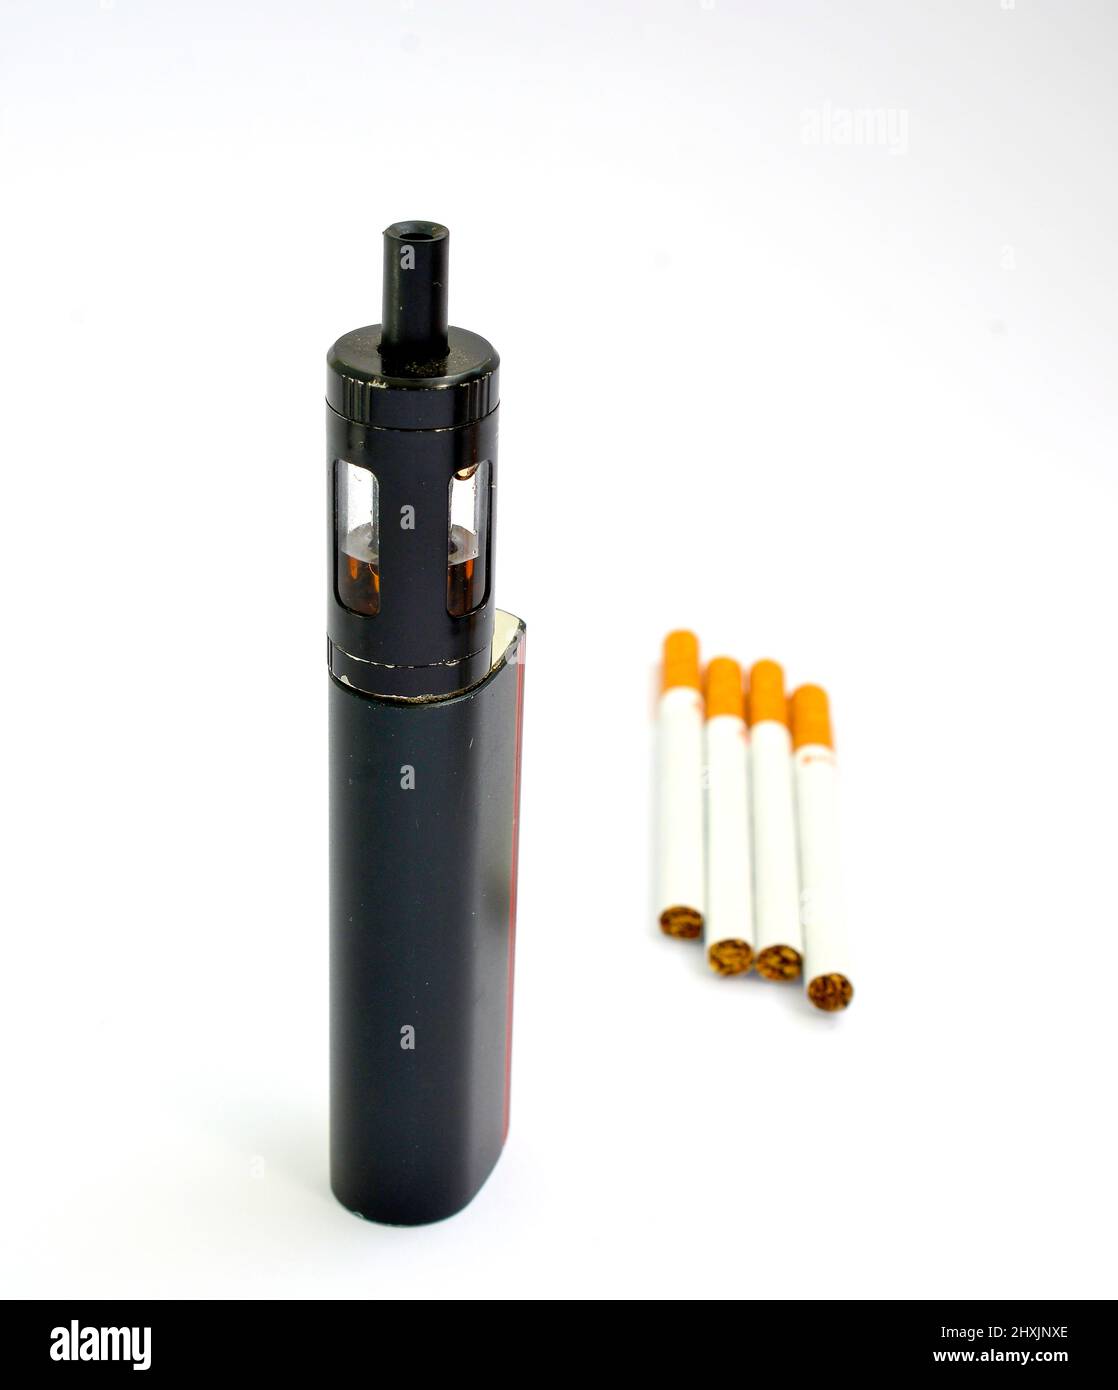 Vaping device, electronic cigarette and cigarettes white background. Stock Photo